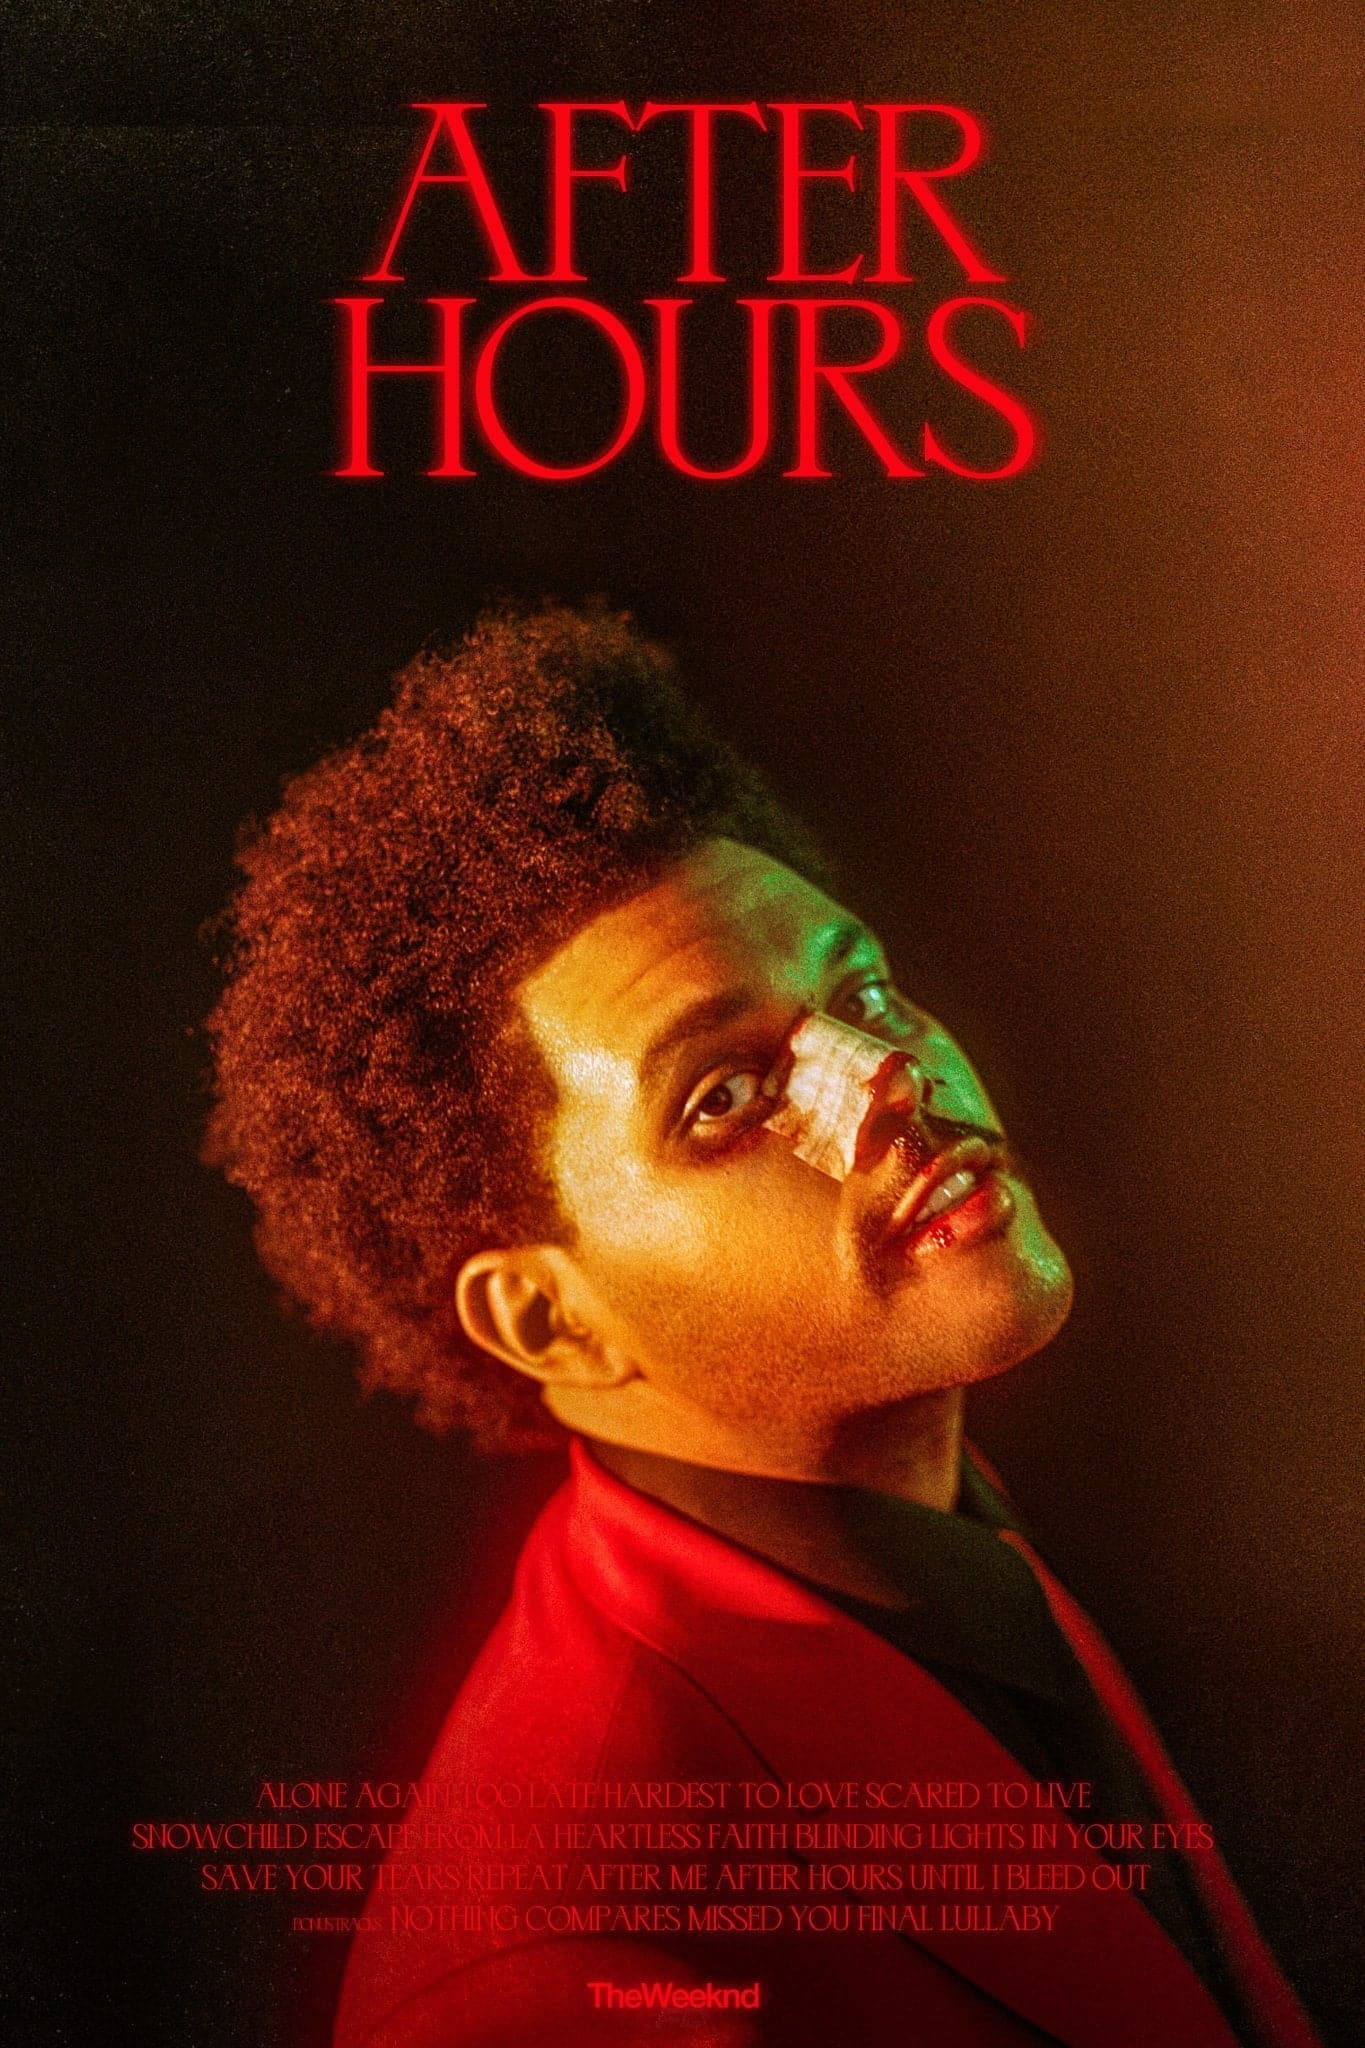 The Weeknd 'After Hours Tracklist' Poster - Posters Plug